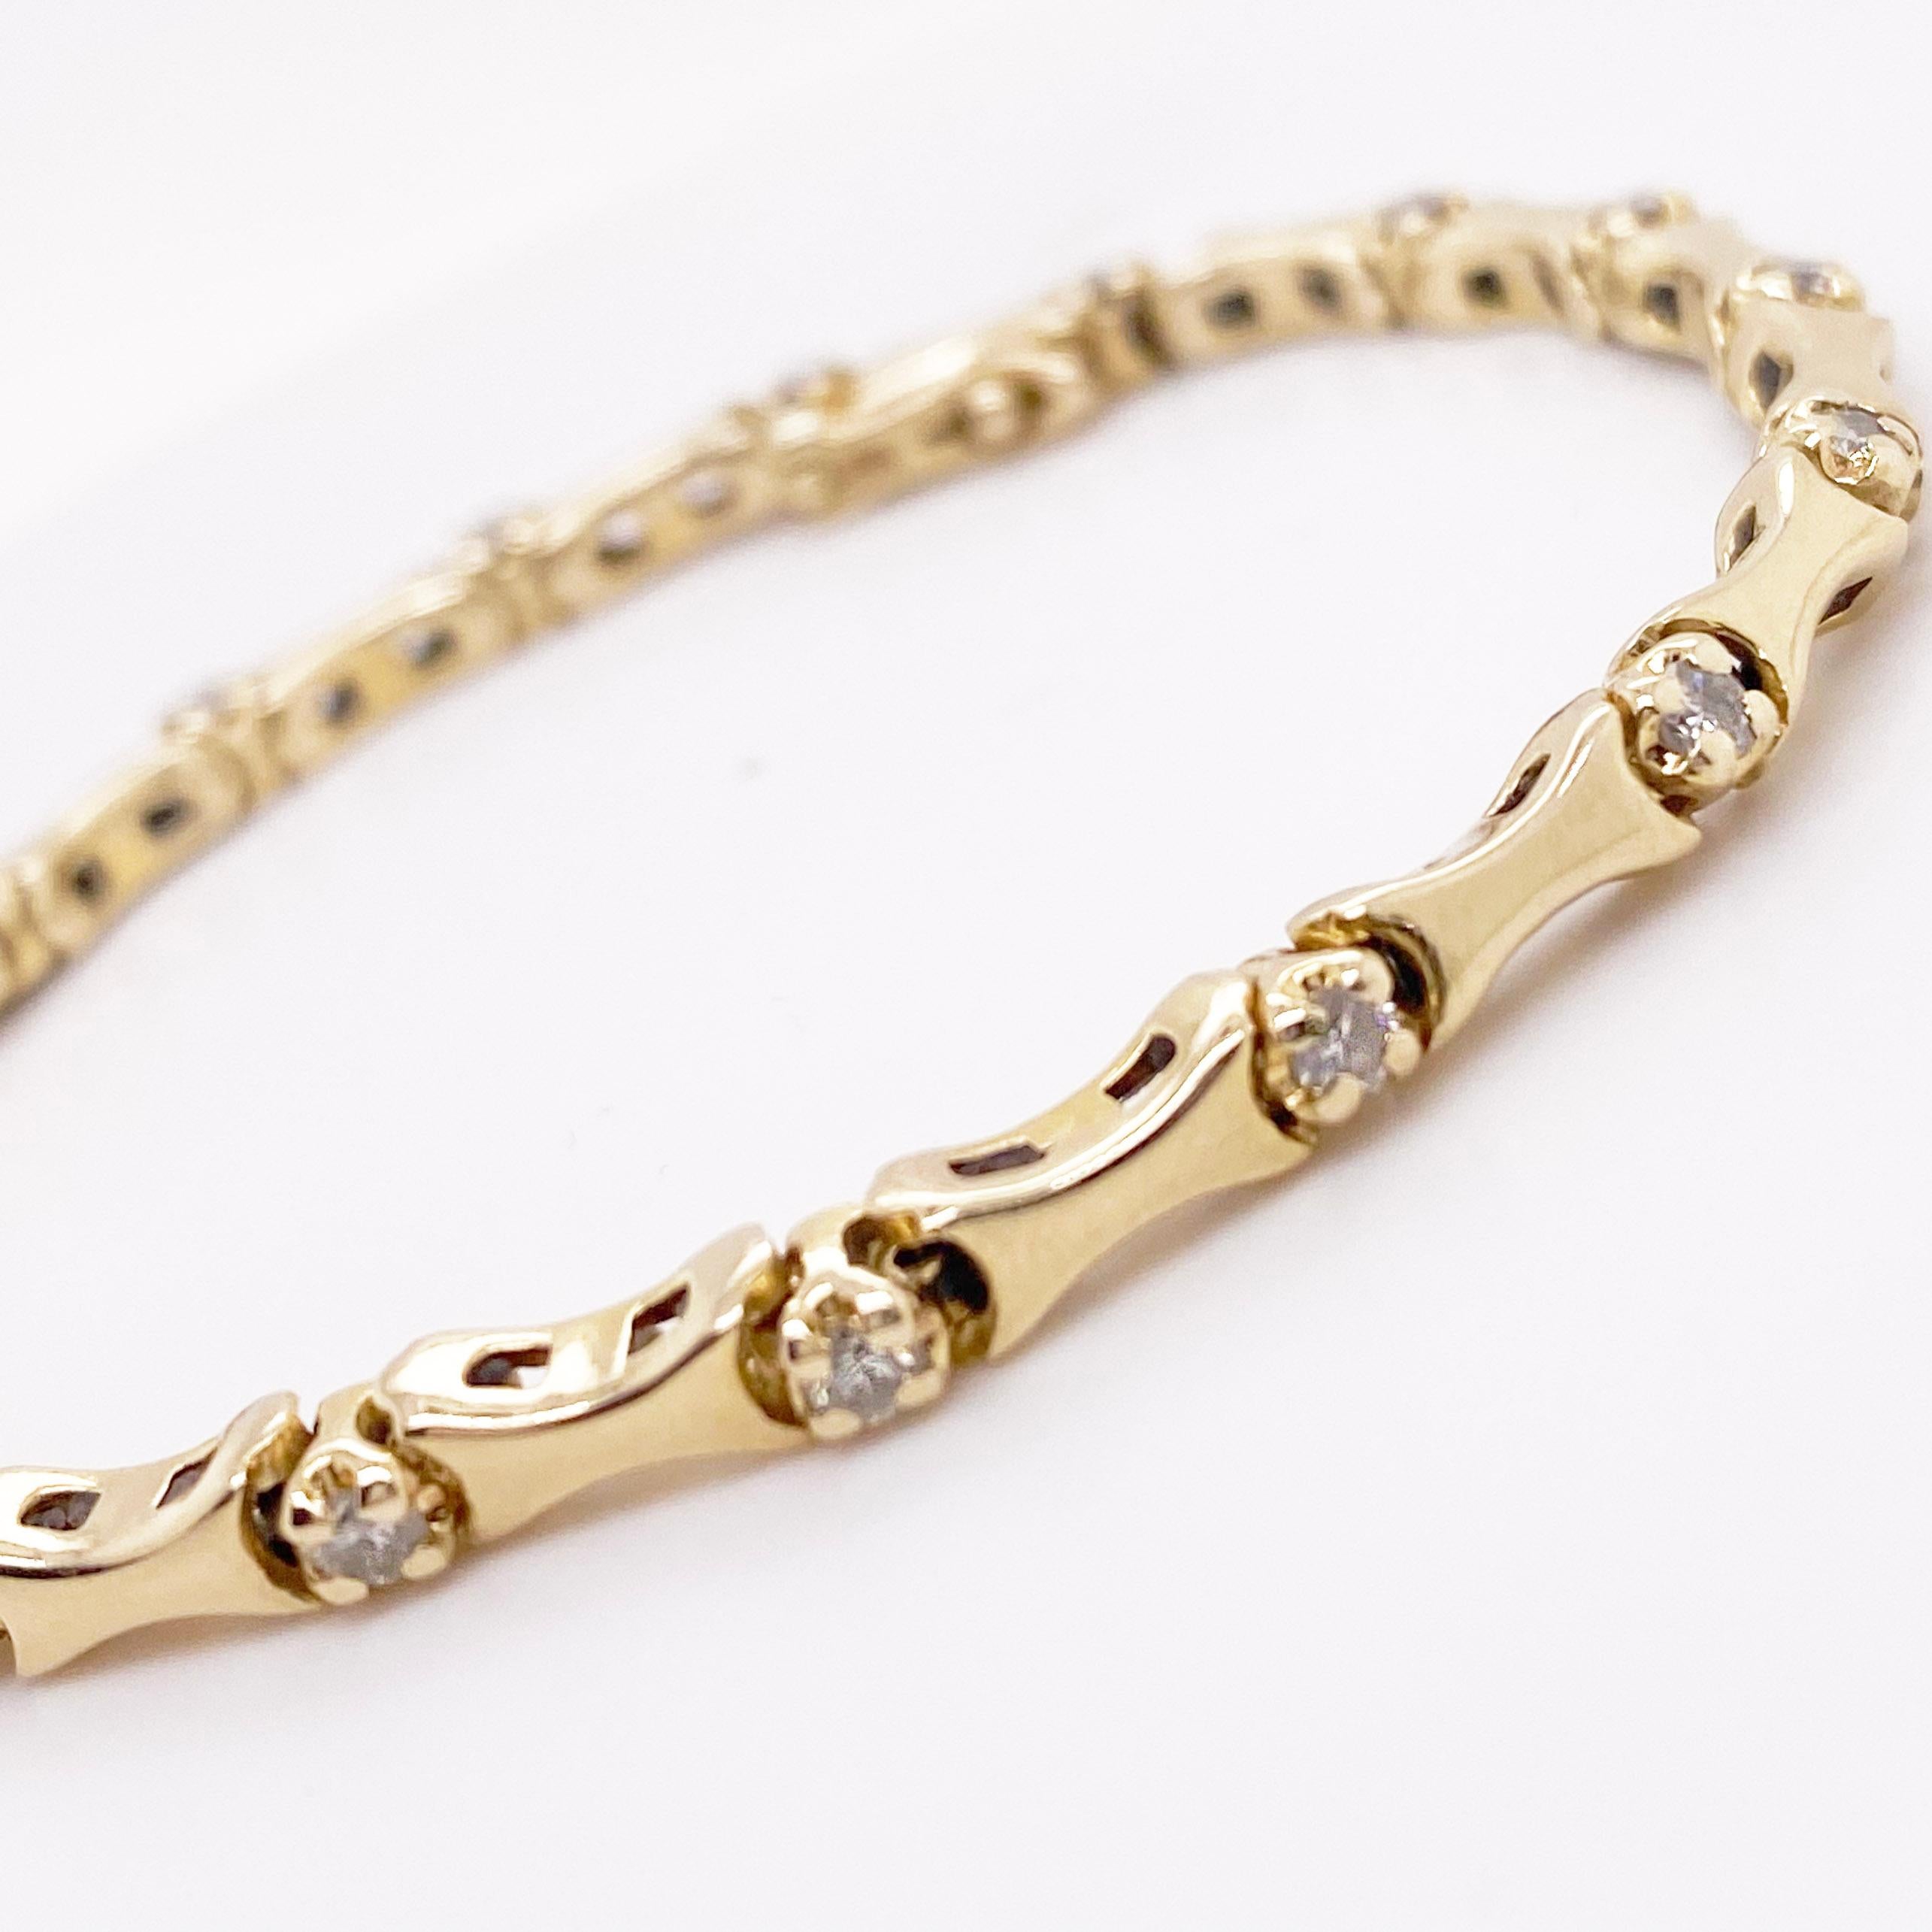 This tennis bracelet is a sleek design that will accent any bracelet party or it can stand alone. If you have always wanted a tennis bracelet this 14 karat yellow gold is a beauty with its white gold settings to hold 17 sparkling diamonds. There is